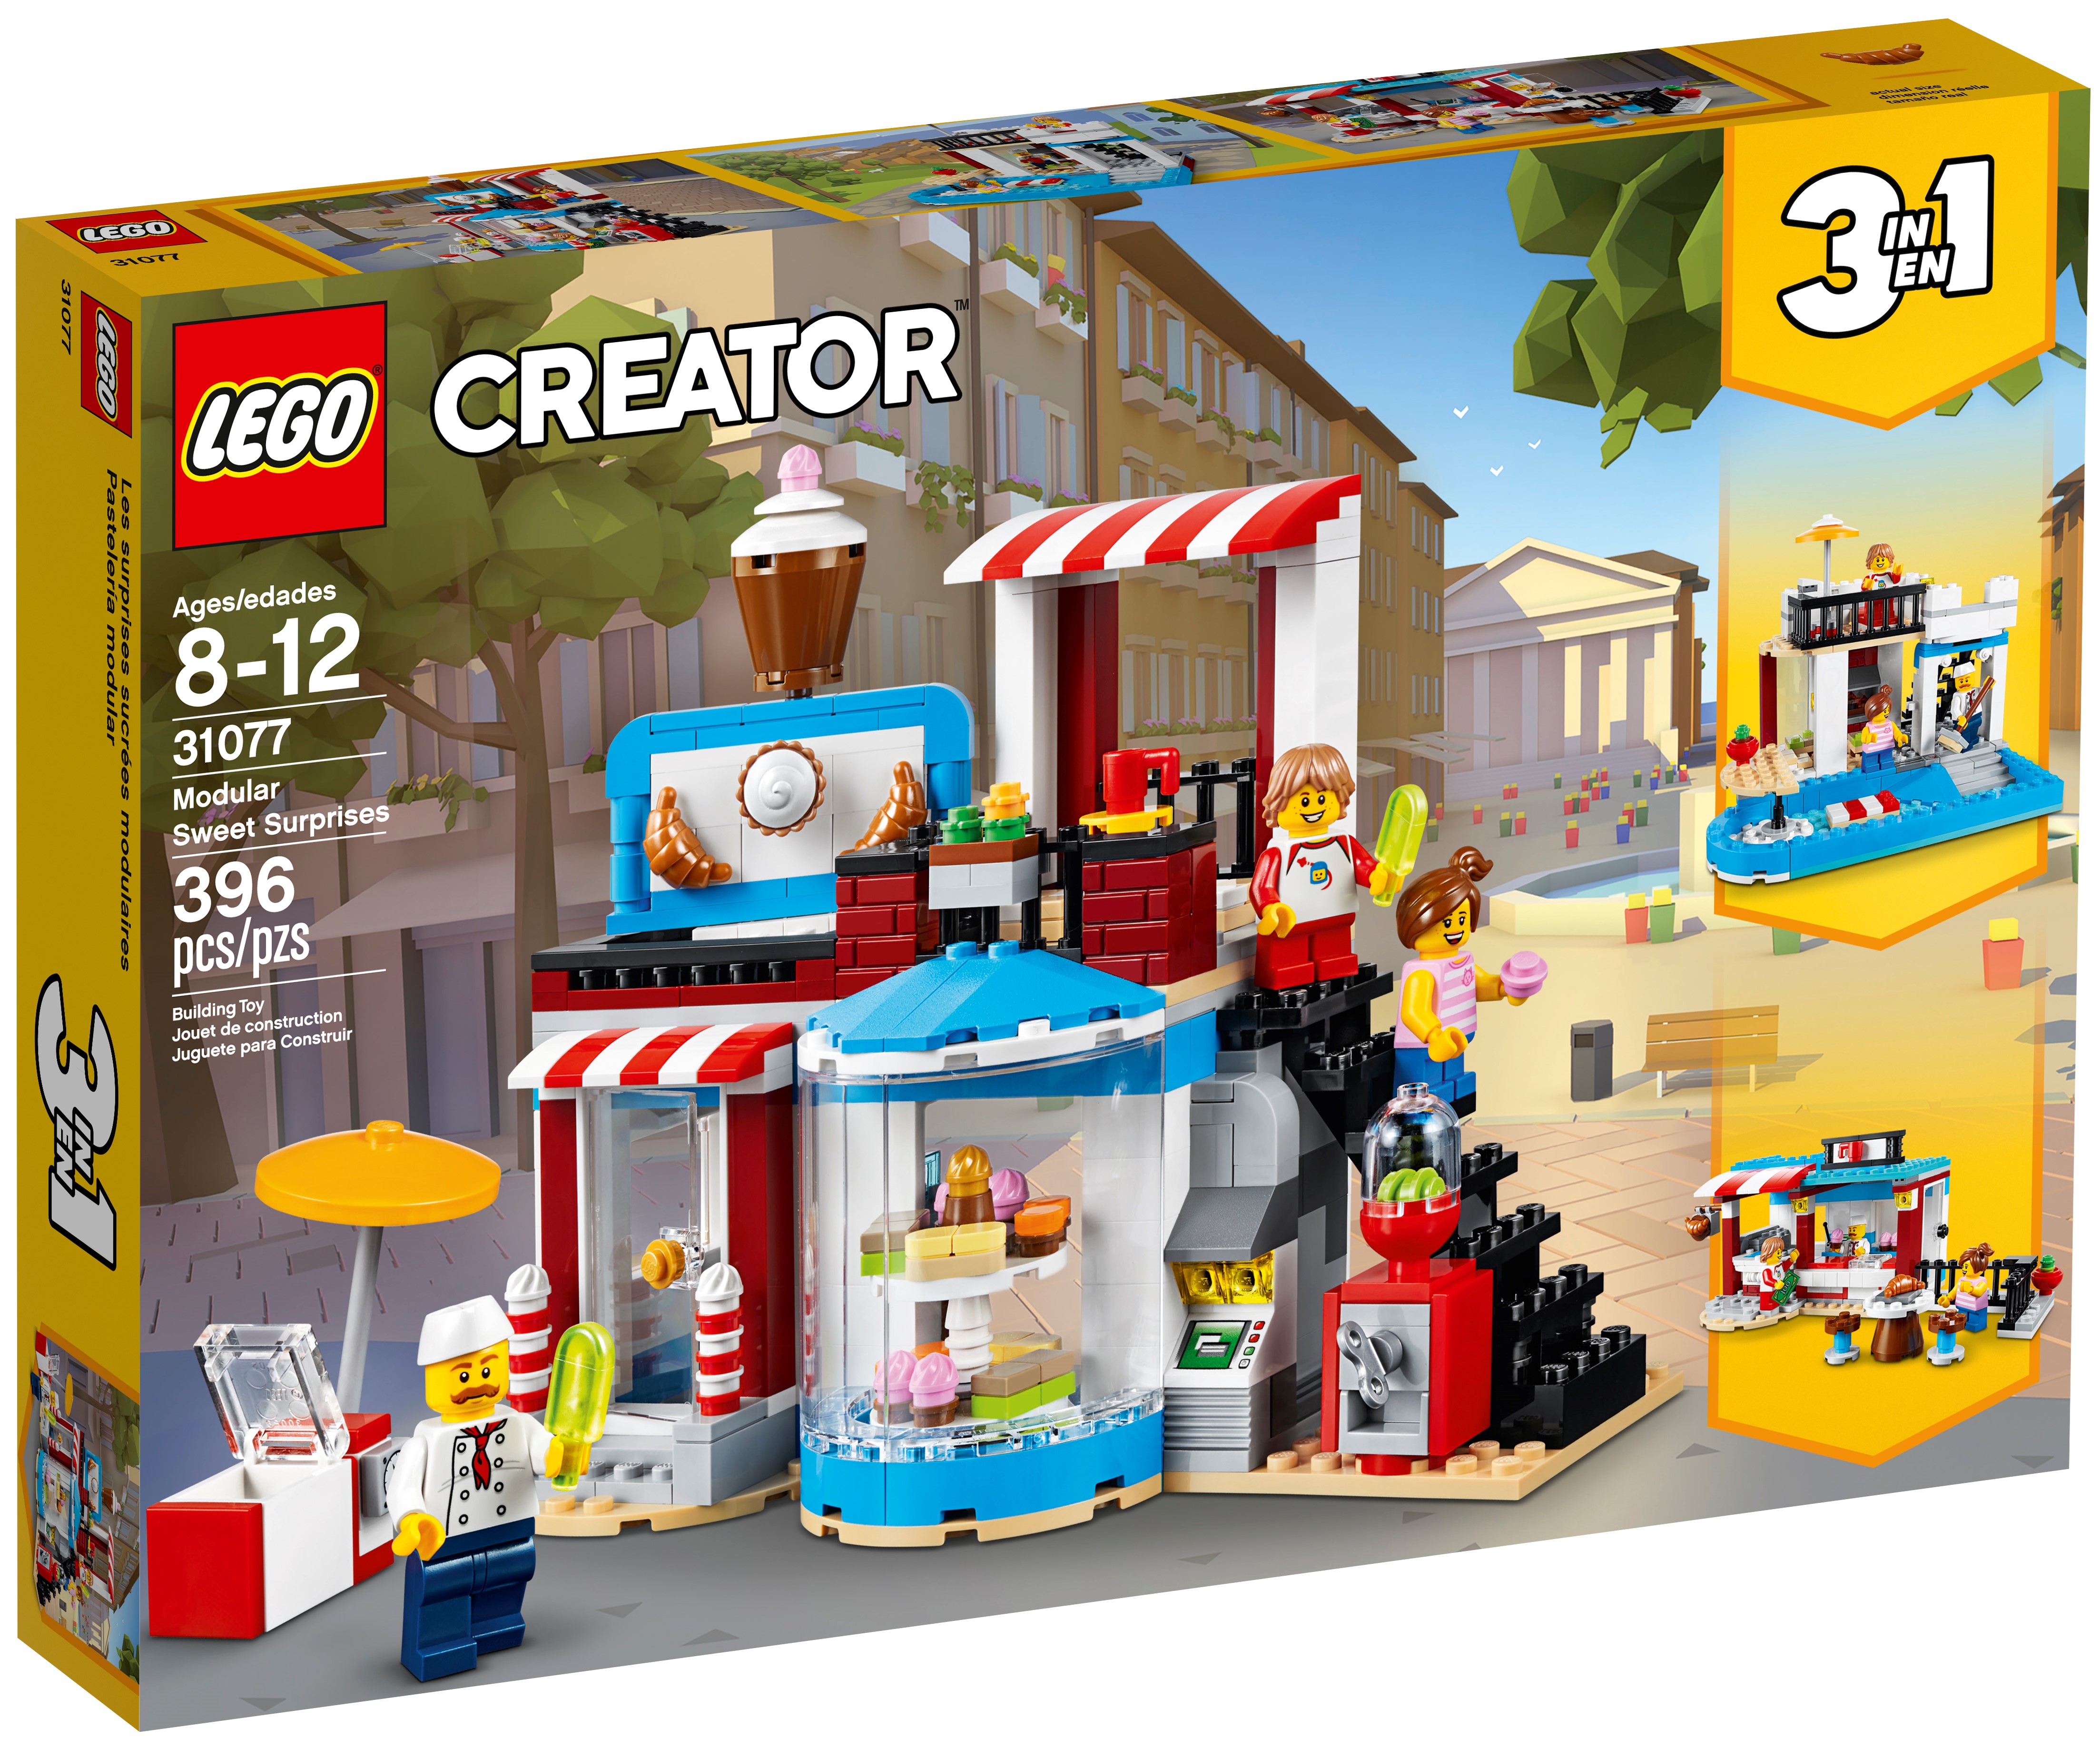 Modular Sweet Surprises 31077 | Creator 3-in-1 | at the Official LEGO® Shop